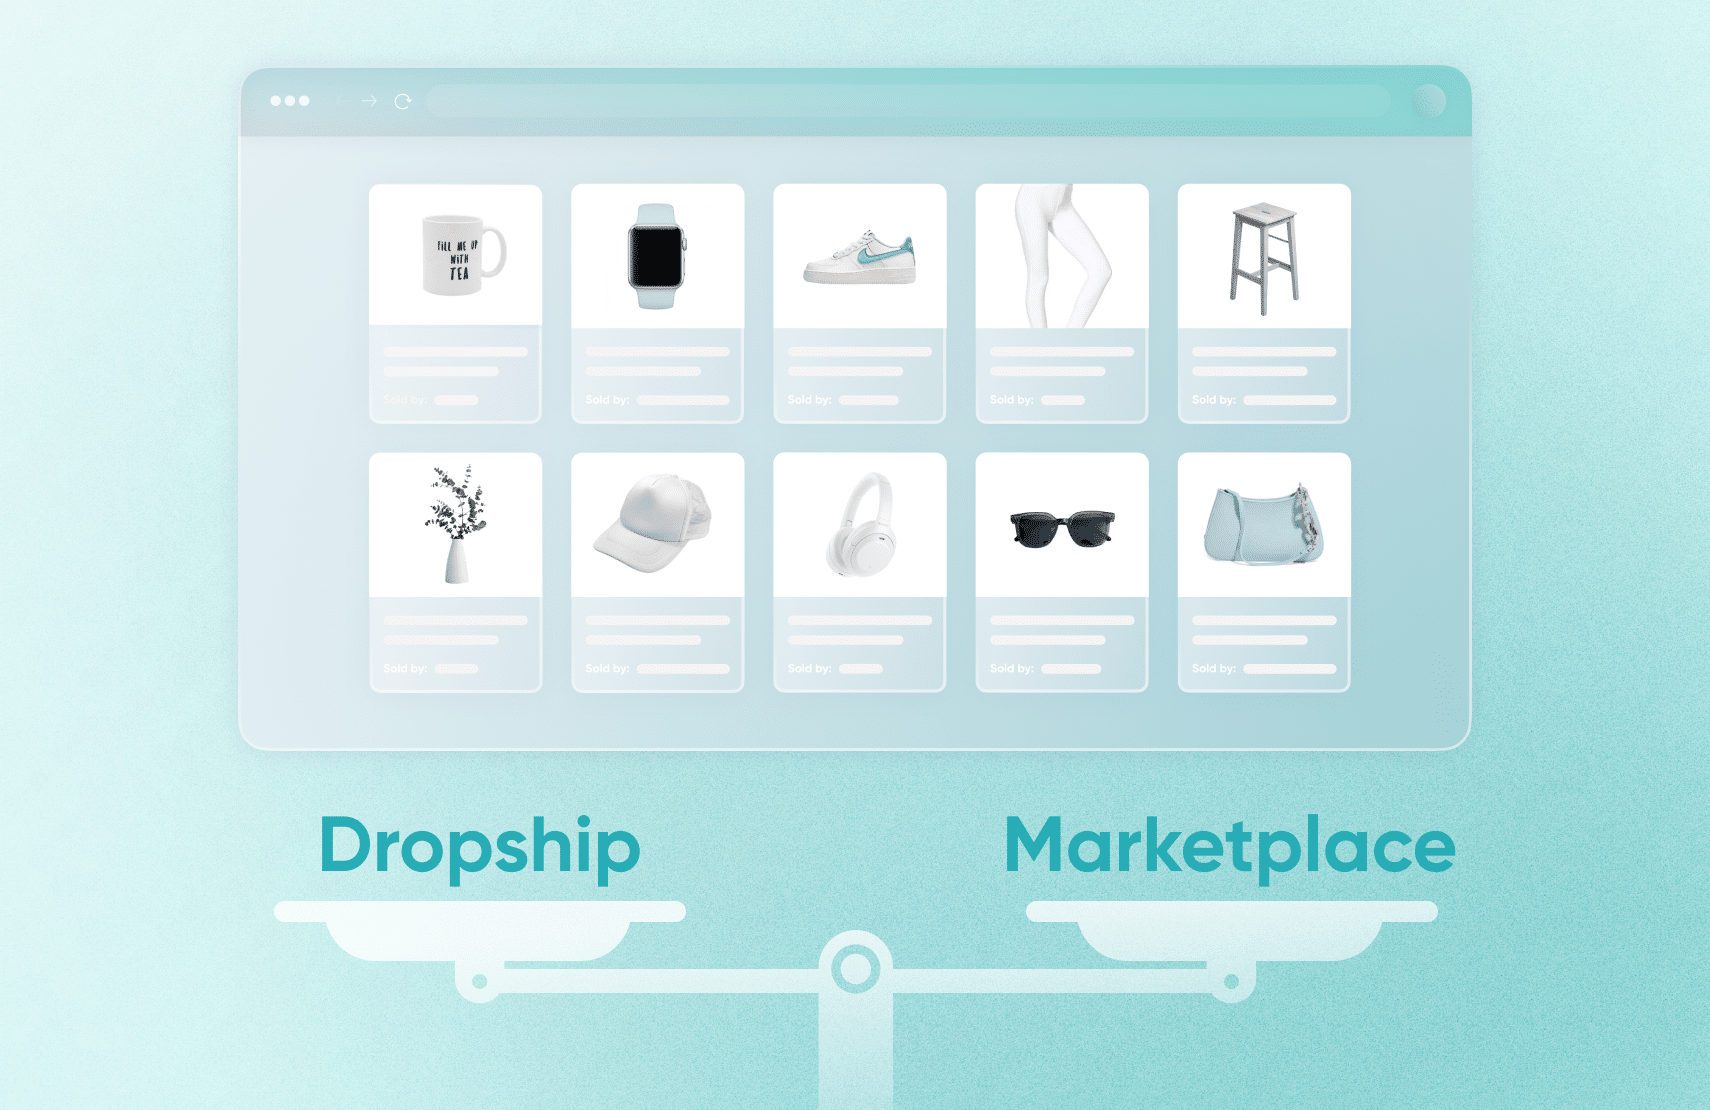 The second step of dropshipping is weighing the pros and cons between dropshipping and a third-party marketplace.